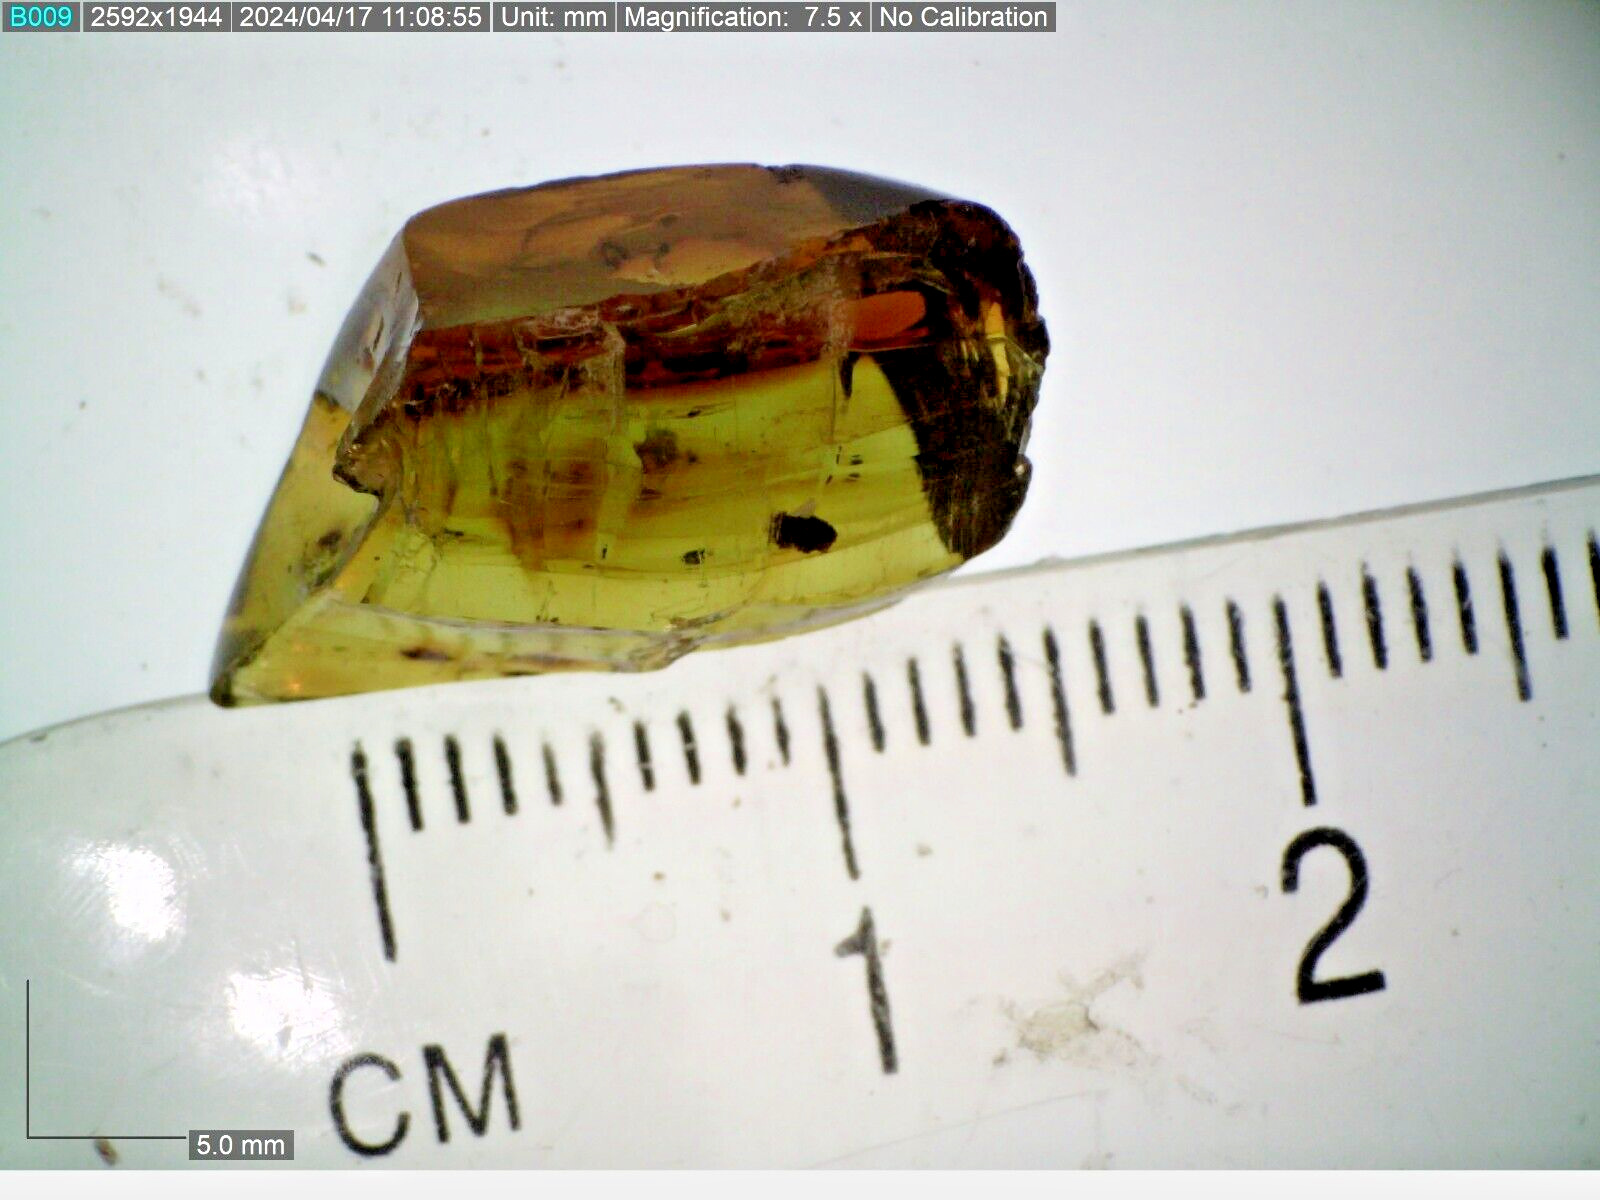 VERY RARE Ethiopian Amber Fossil Nugget EA1 0.91g